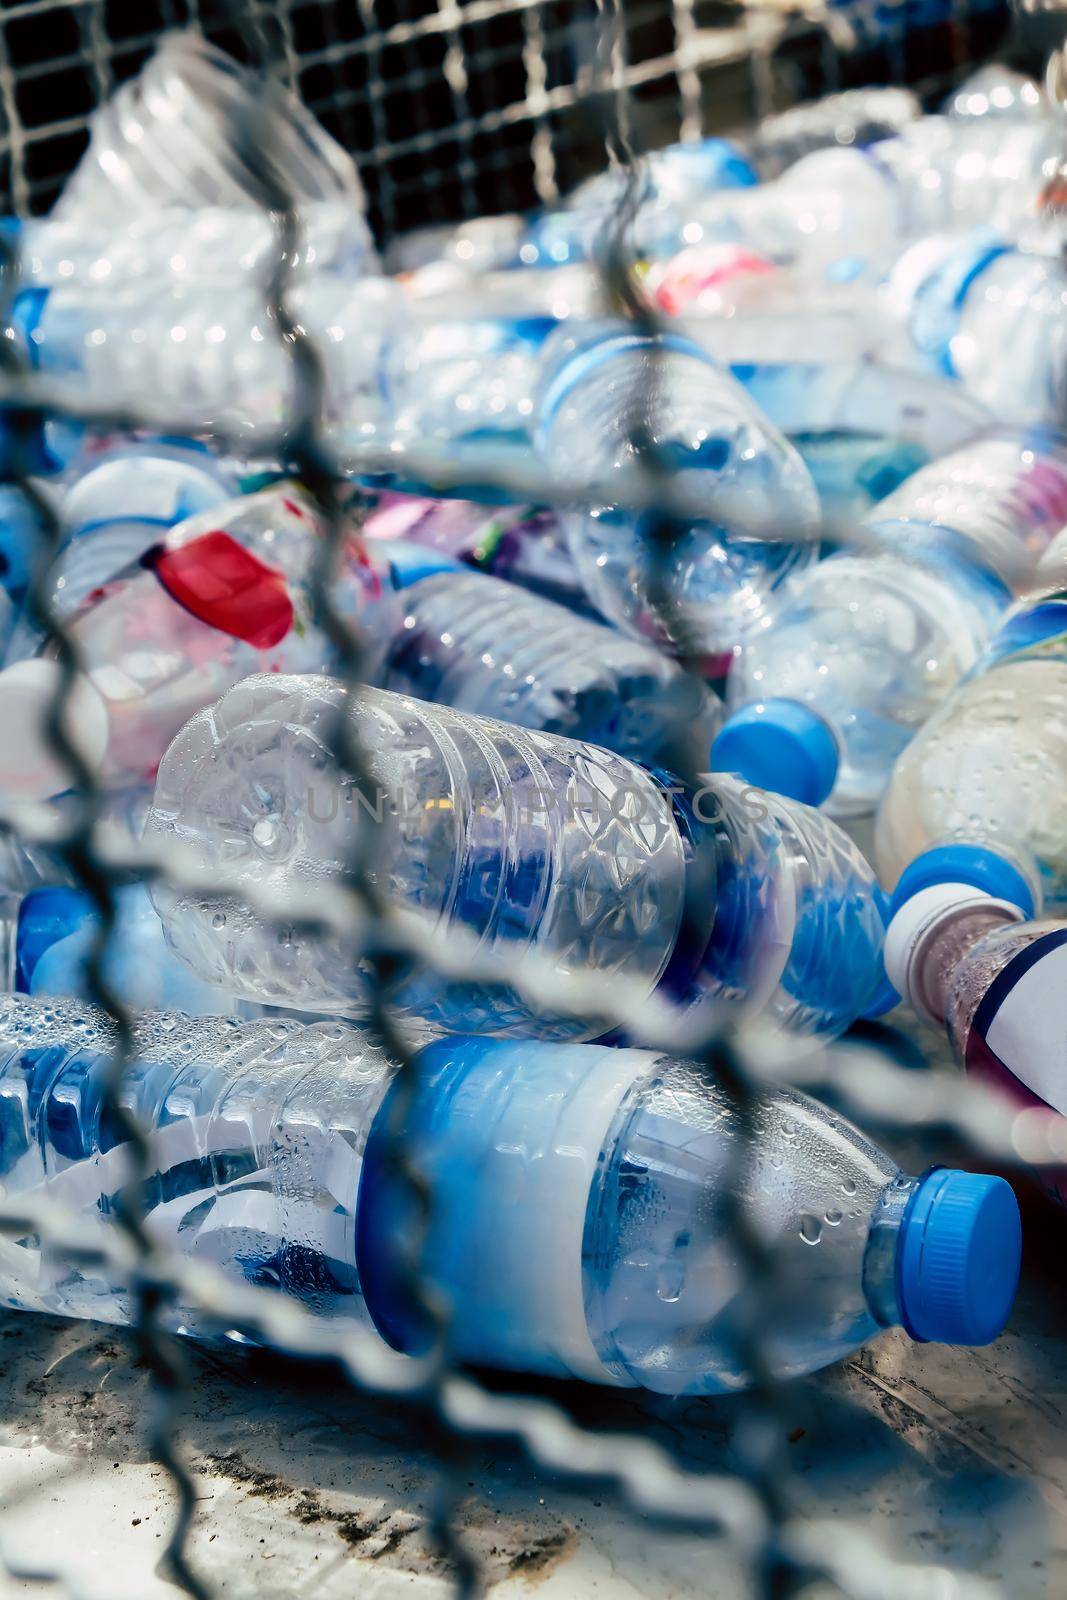 Image of Plastic bottles and containers prepared for recycling